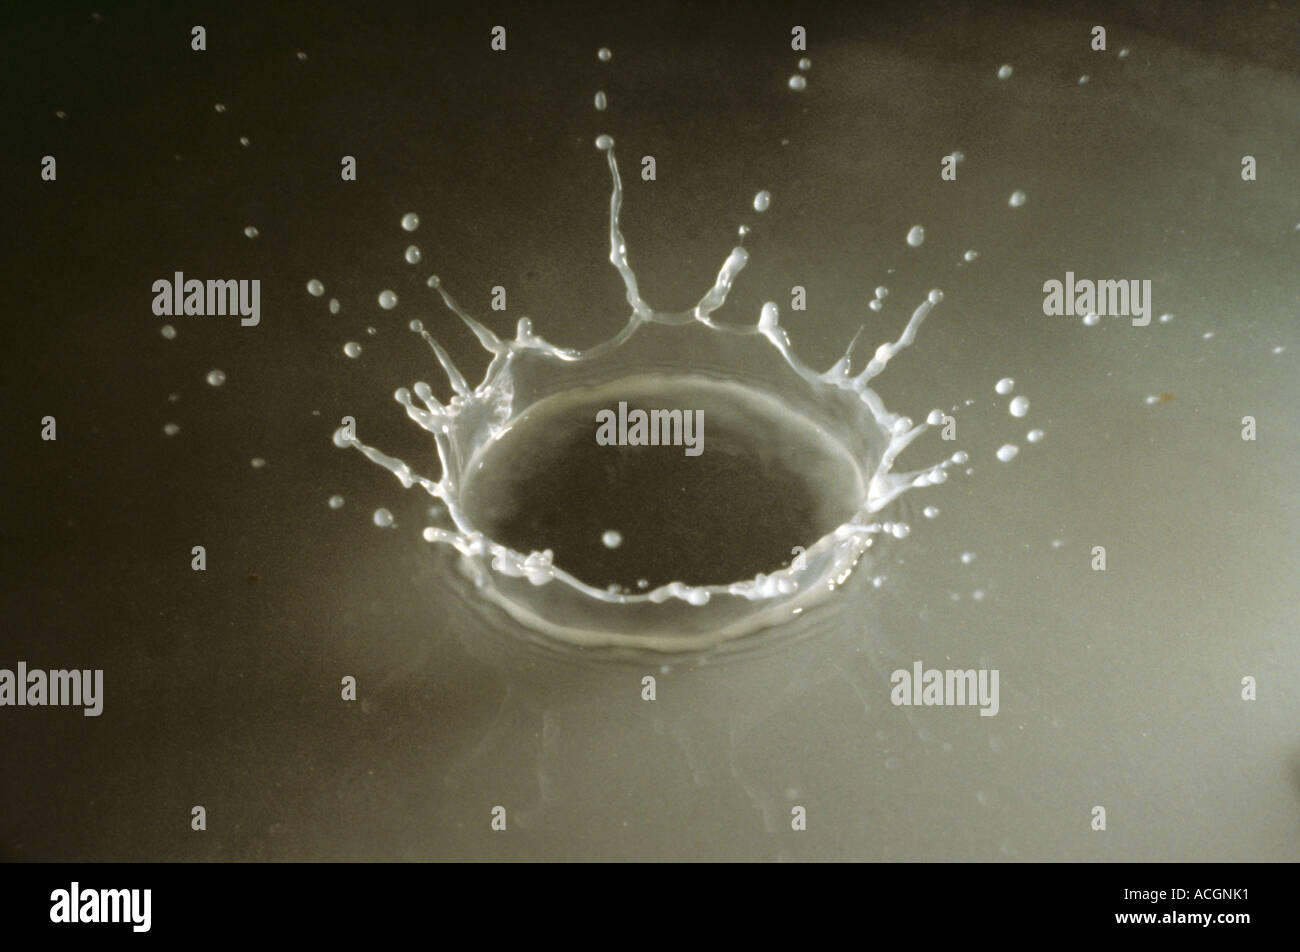 A corona formed by a droplet of water splashing on a glass surface Stock Photo